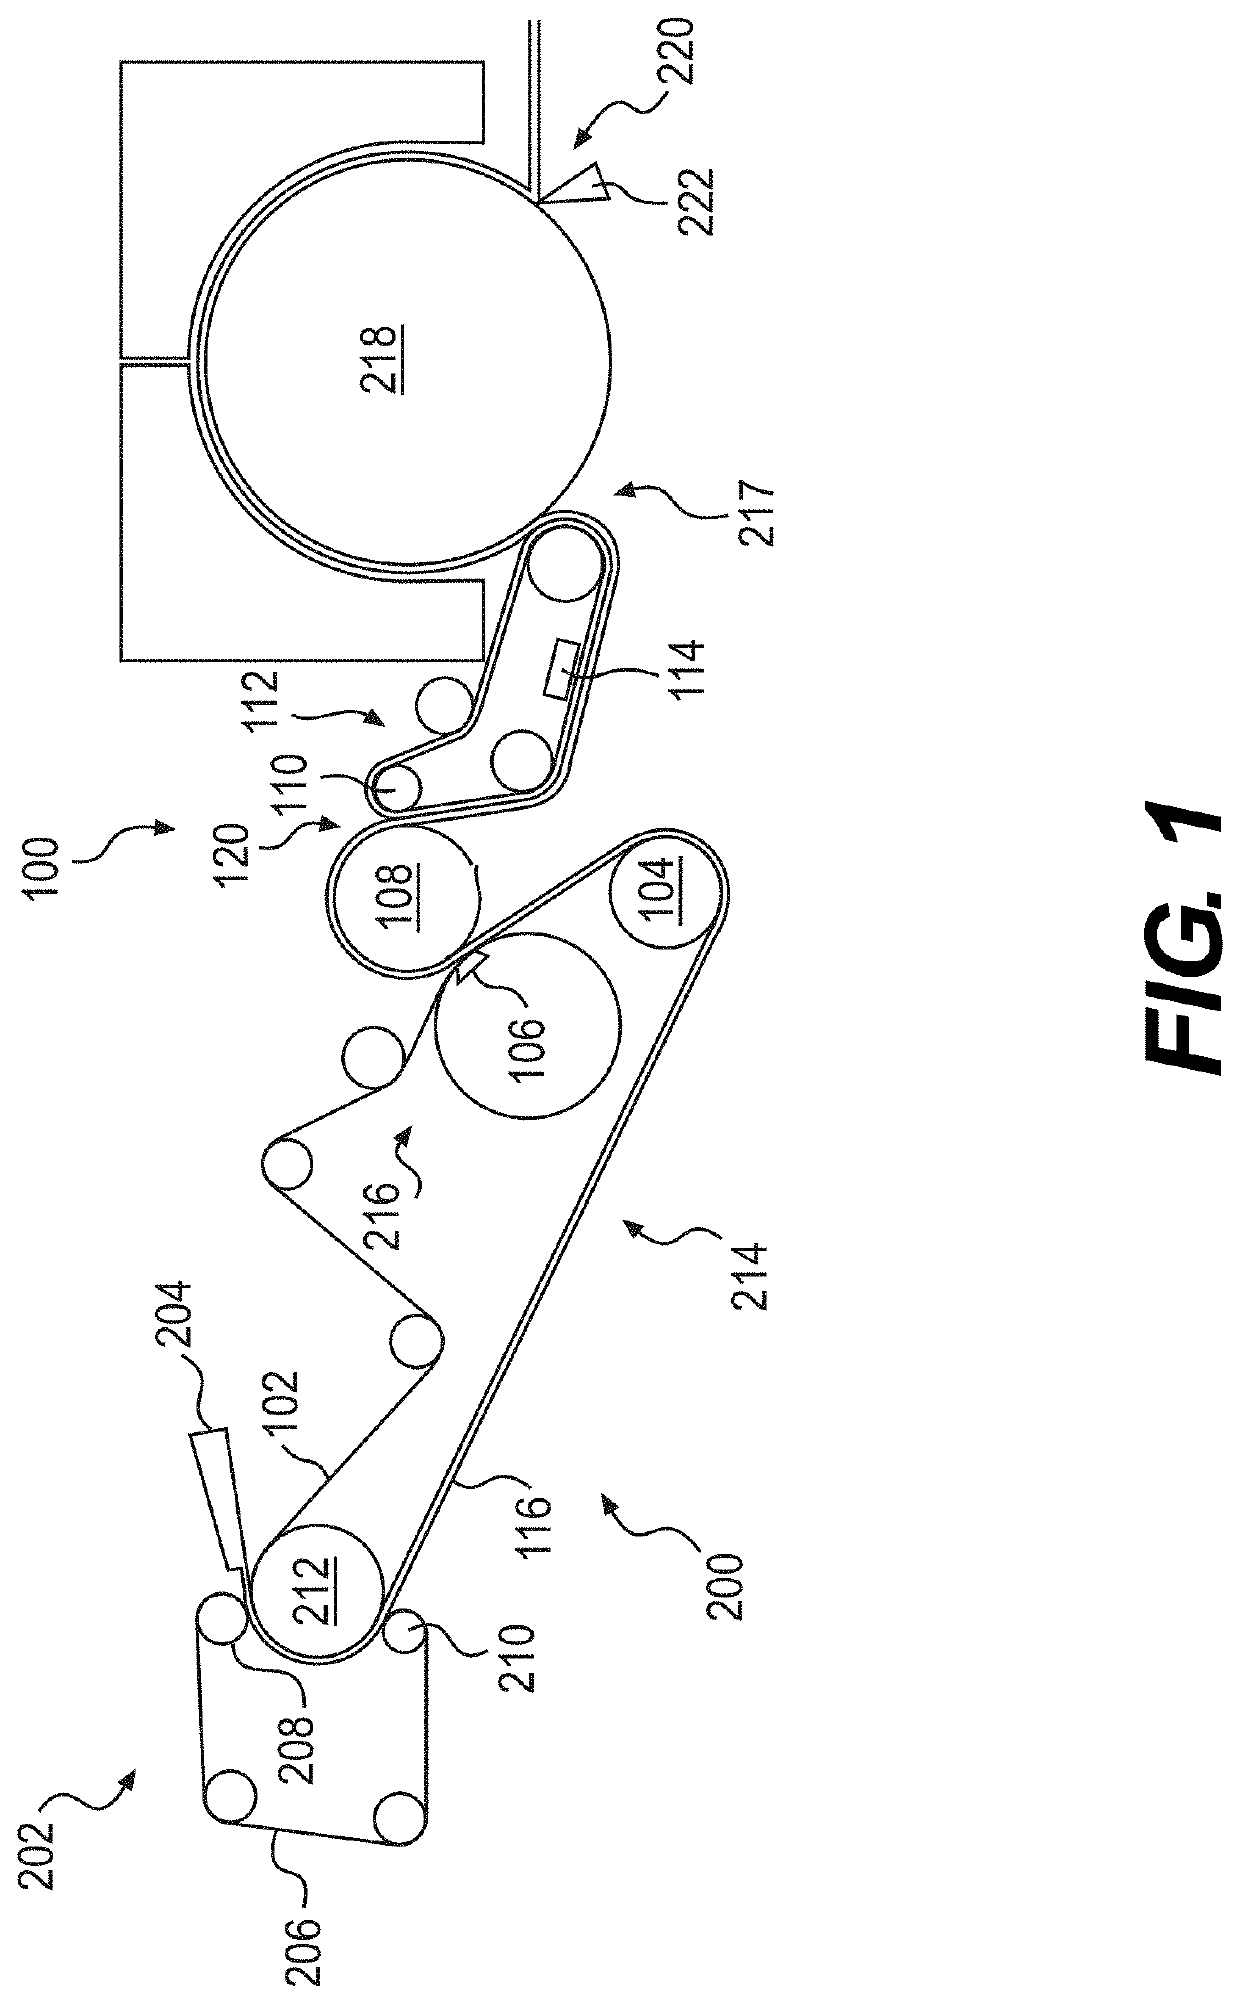 Multilayer creping belt having connected openings, methods of making paper products using such a creping belt, and related paper products